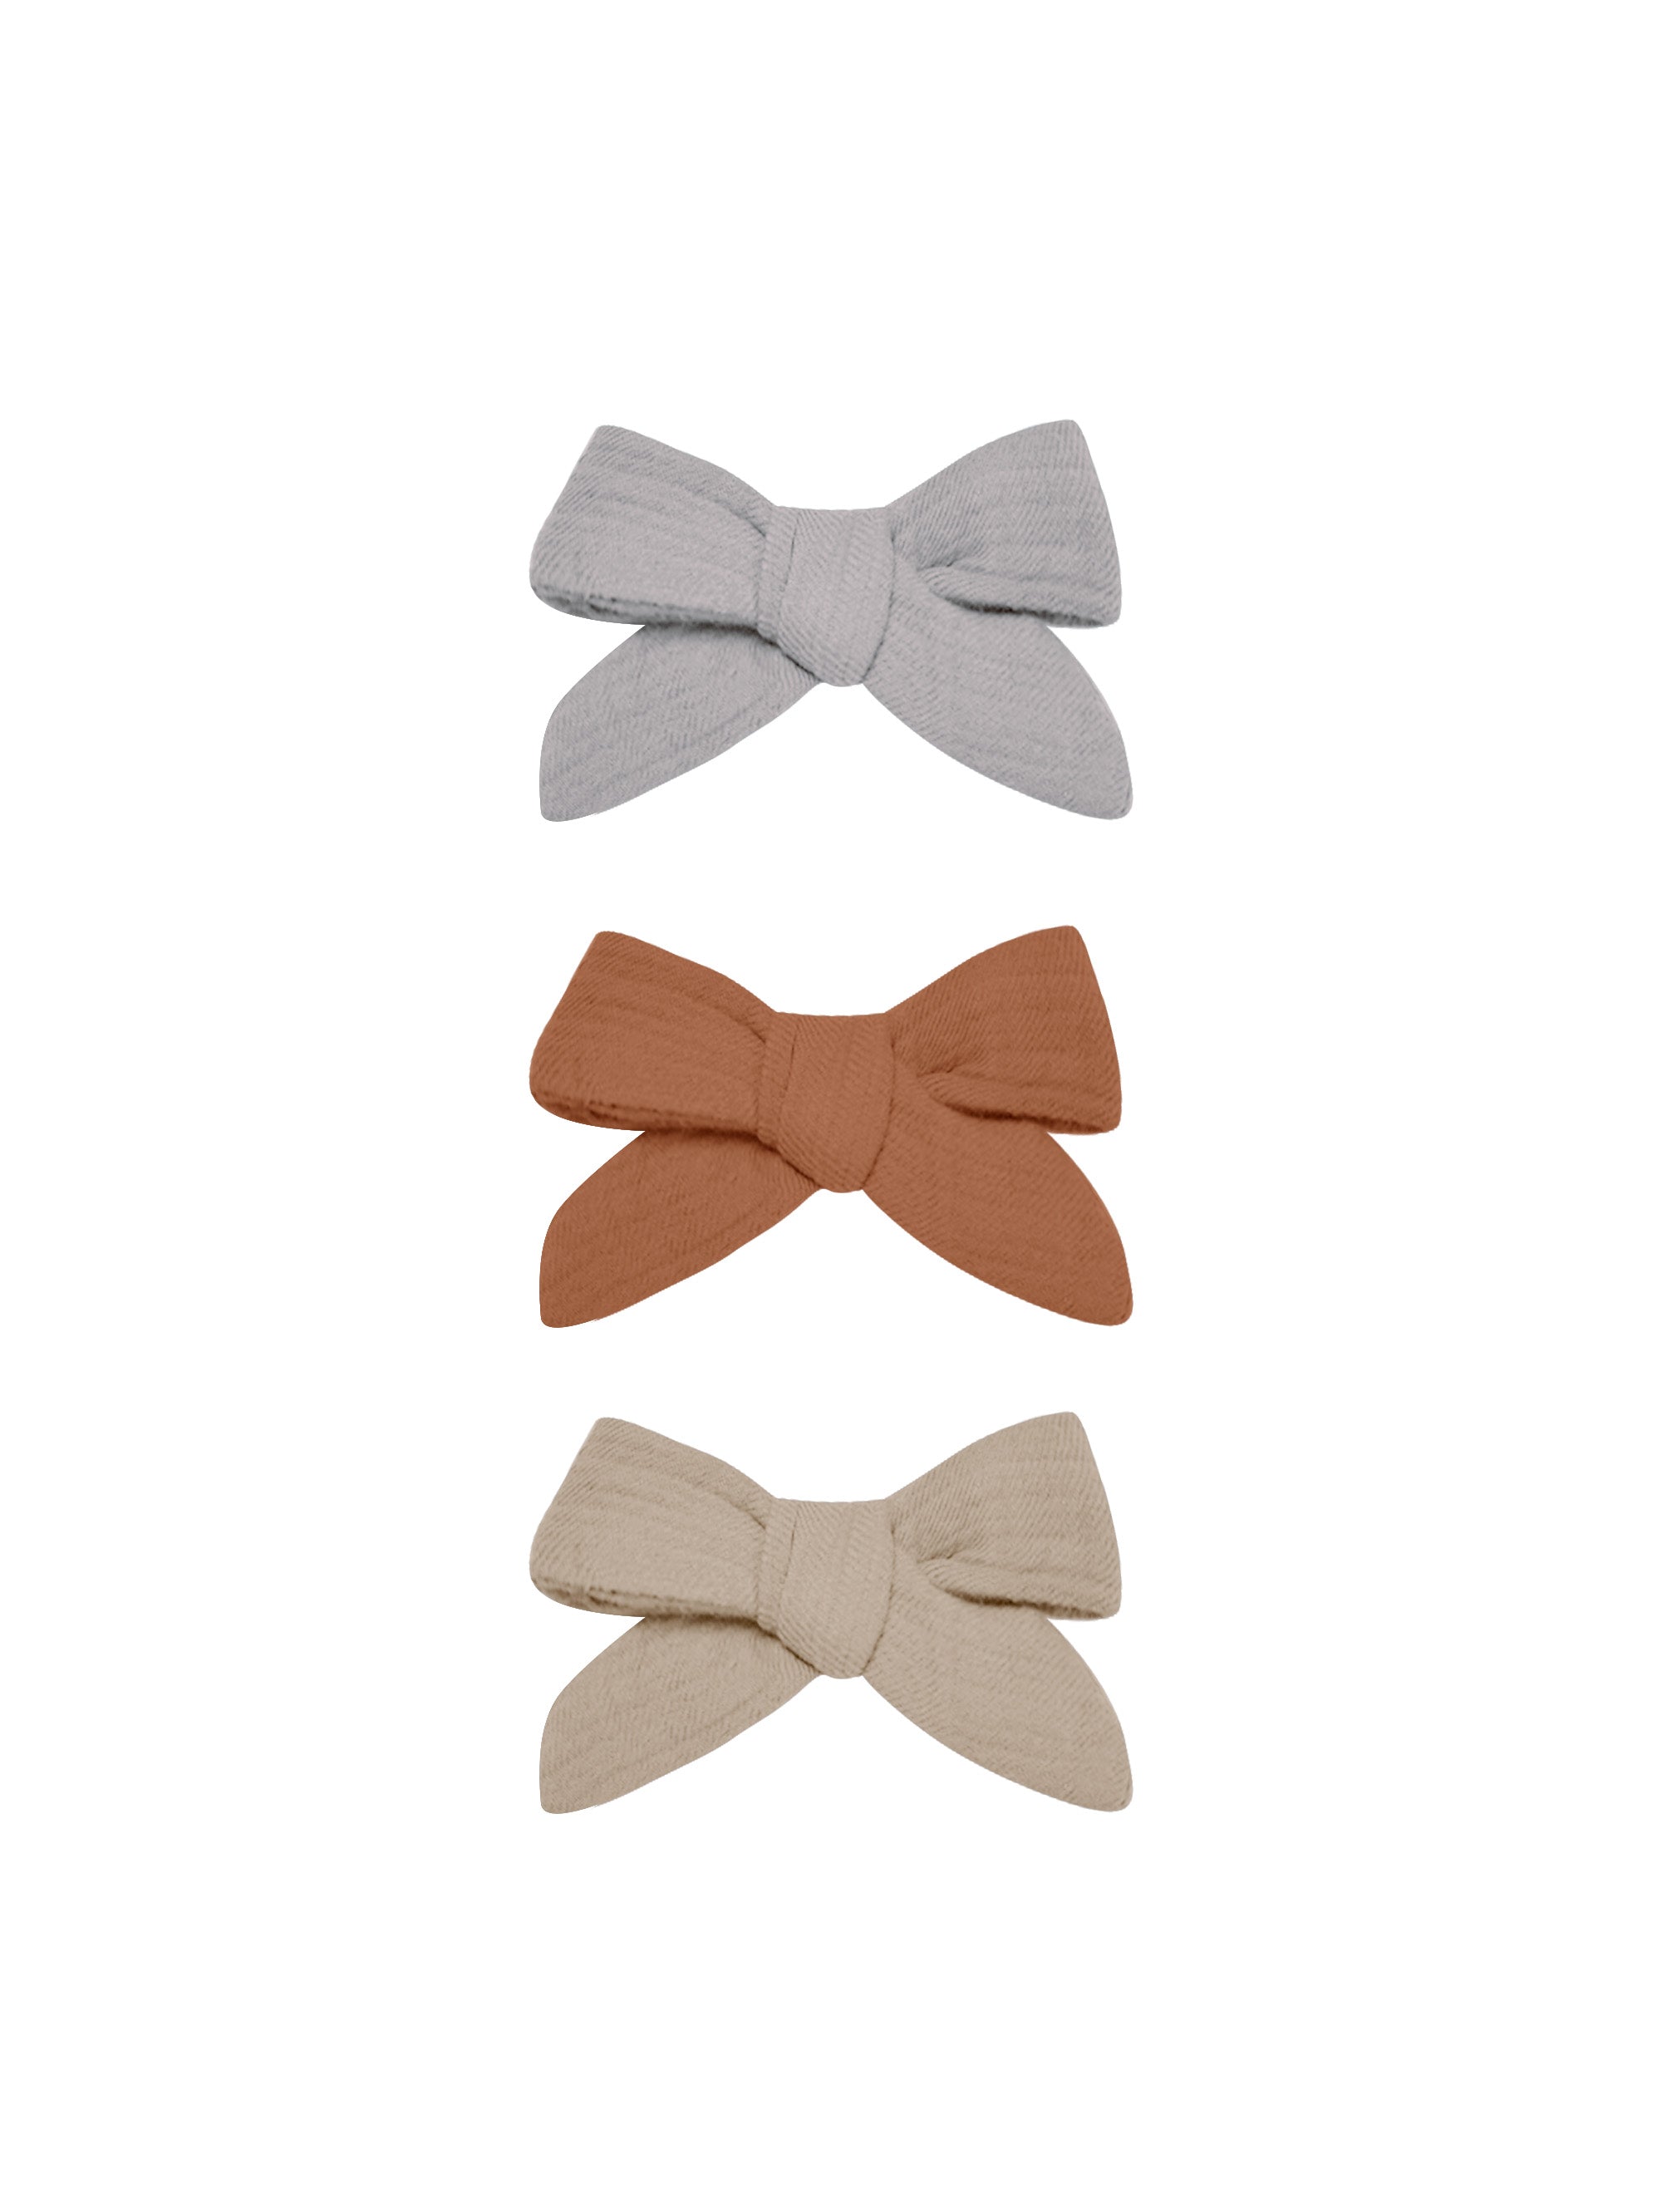 Quincy Mae Bow Clip Set / Periwinkle, Clay & Oat